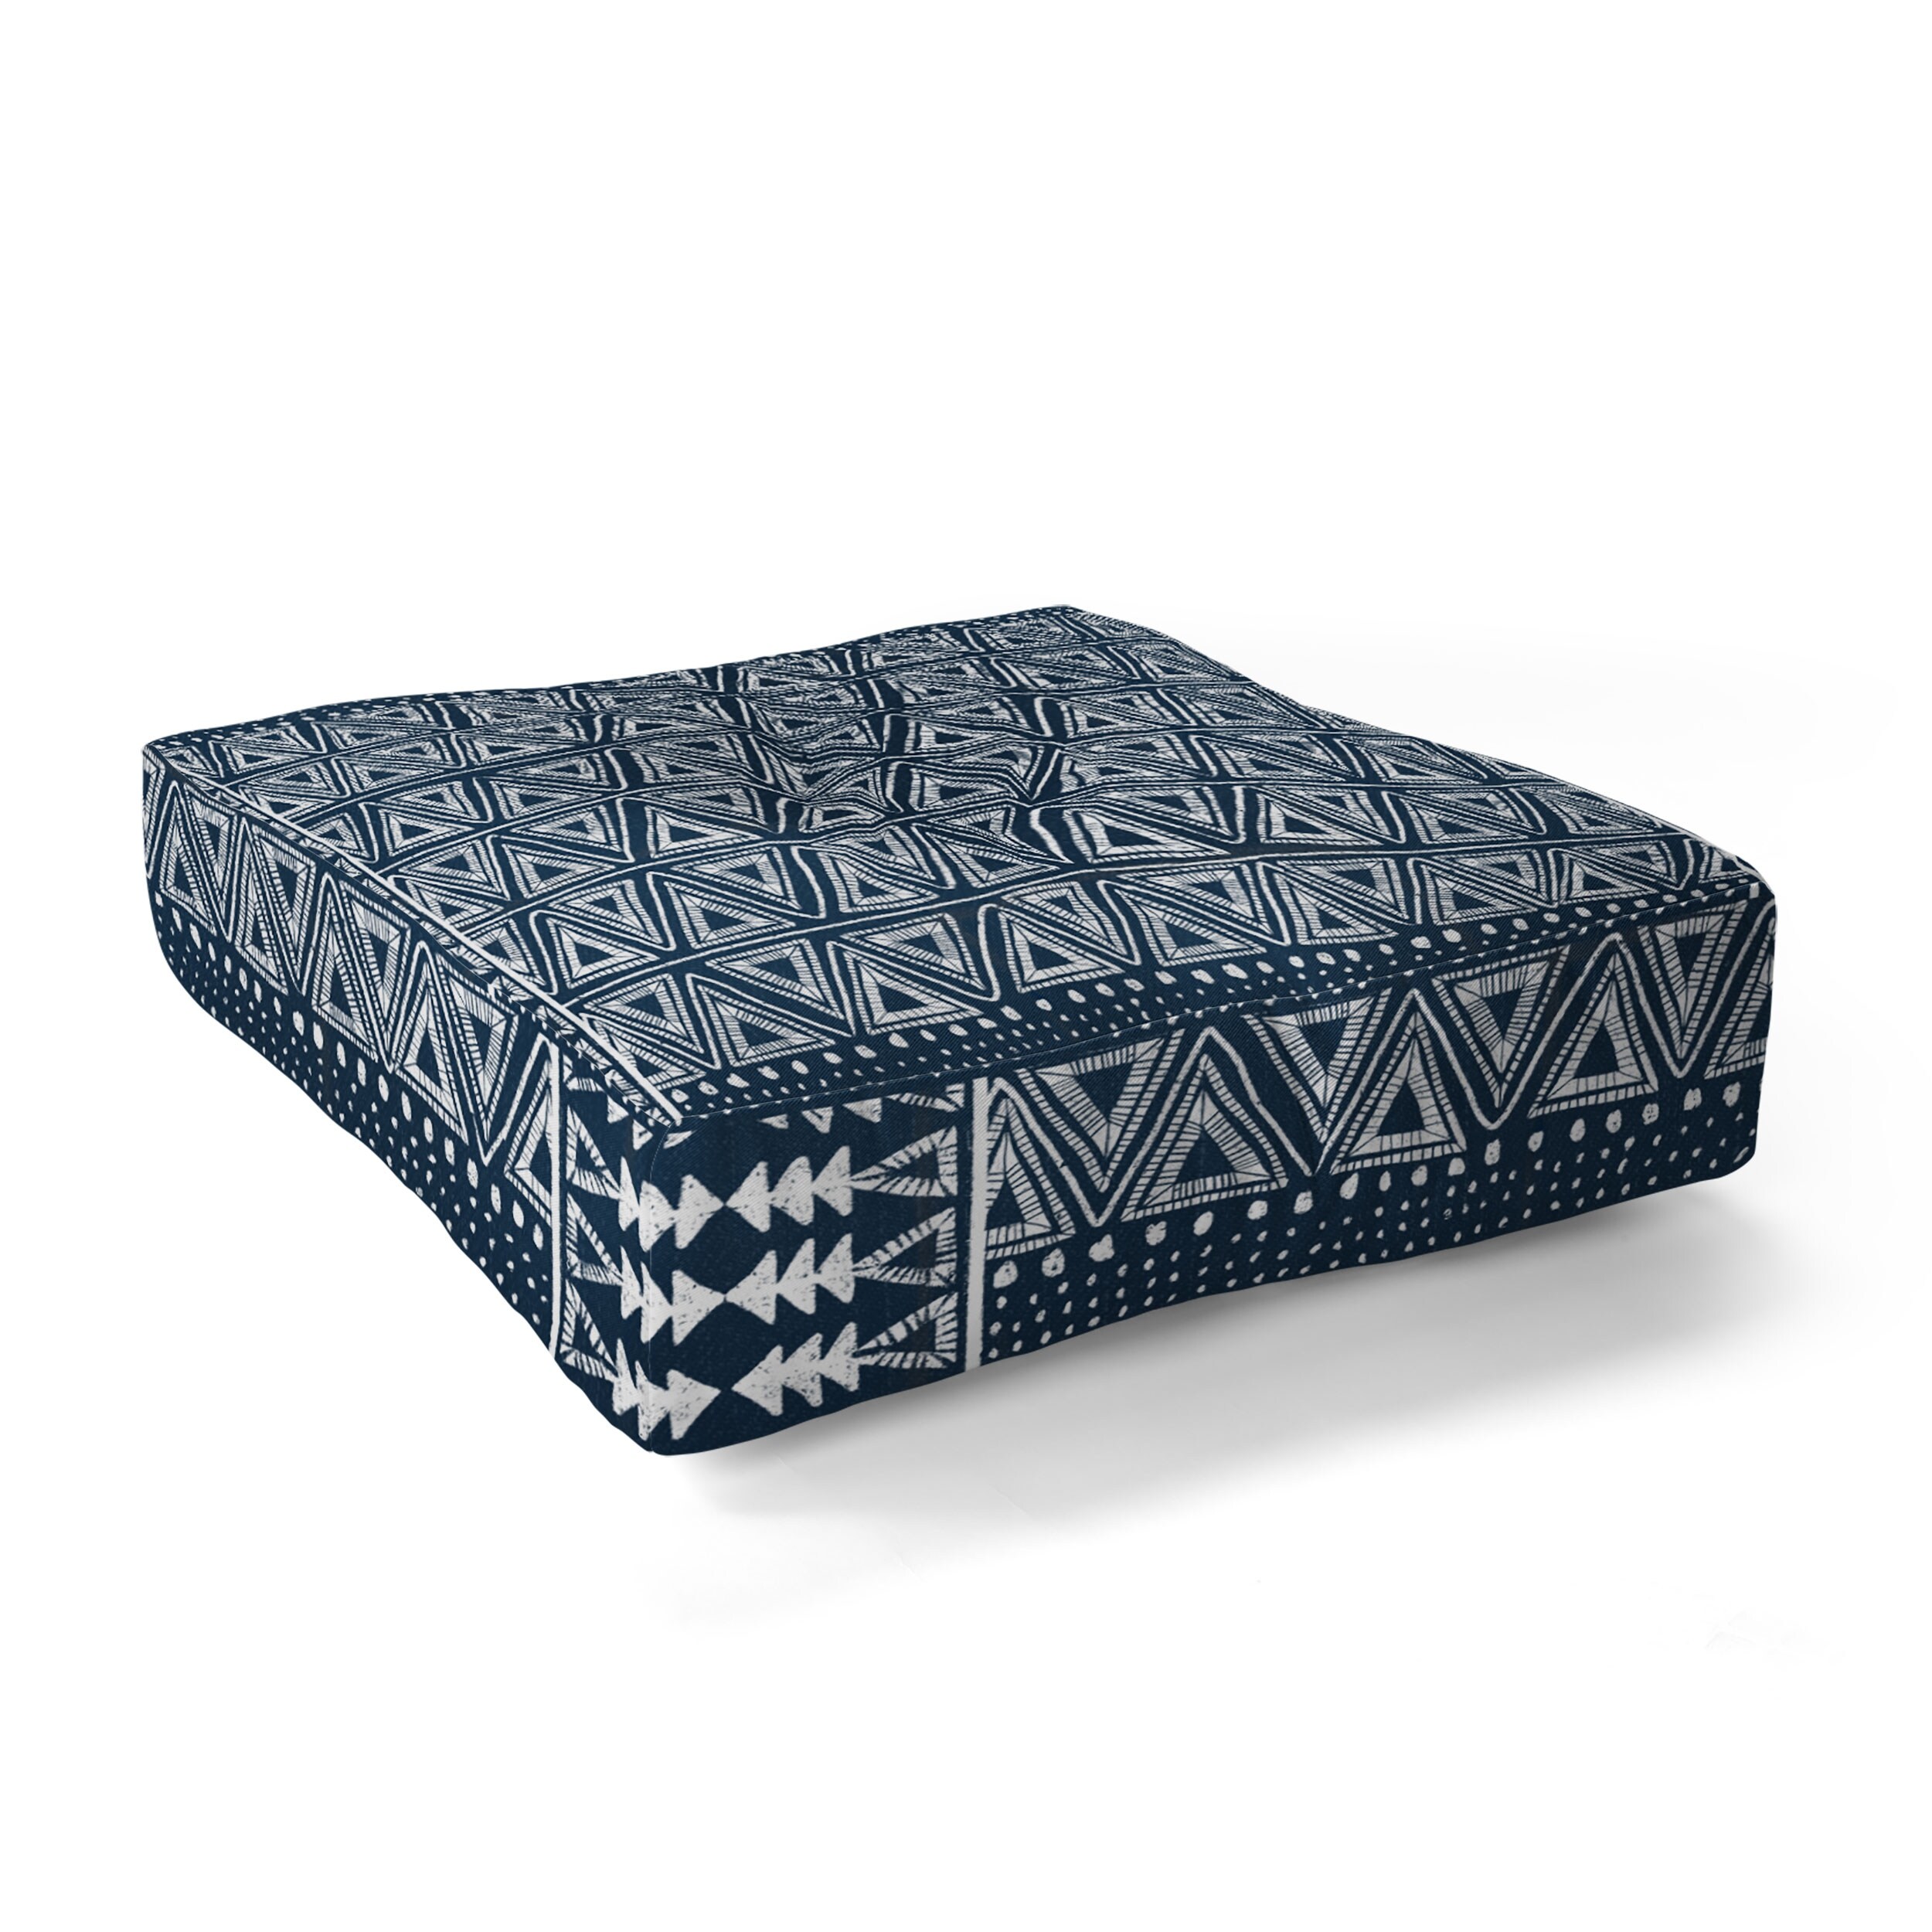 Deny Designs Blue Tribal Floor Pillow (Round or Square)